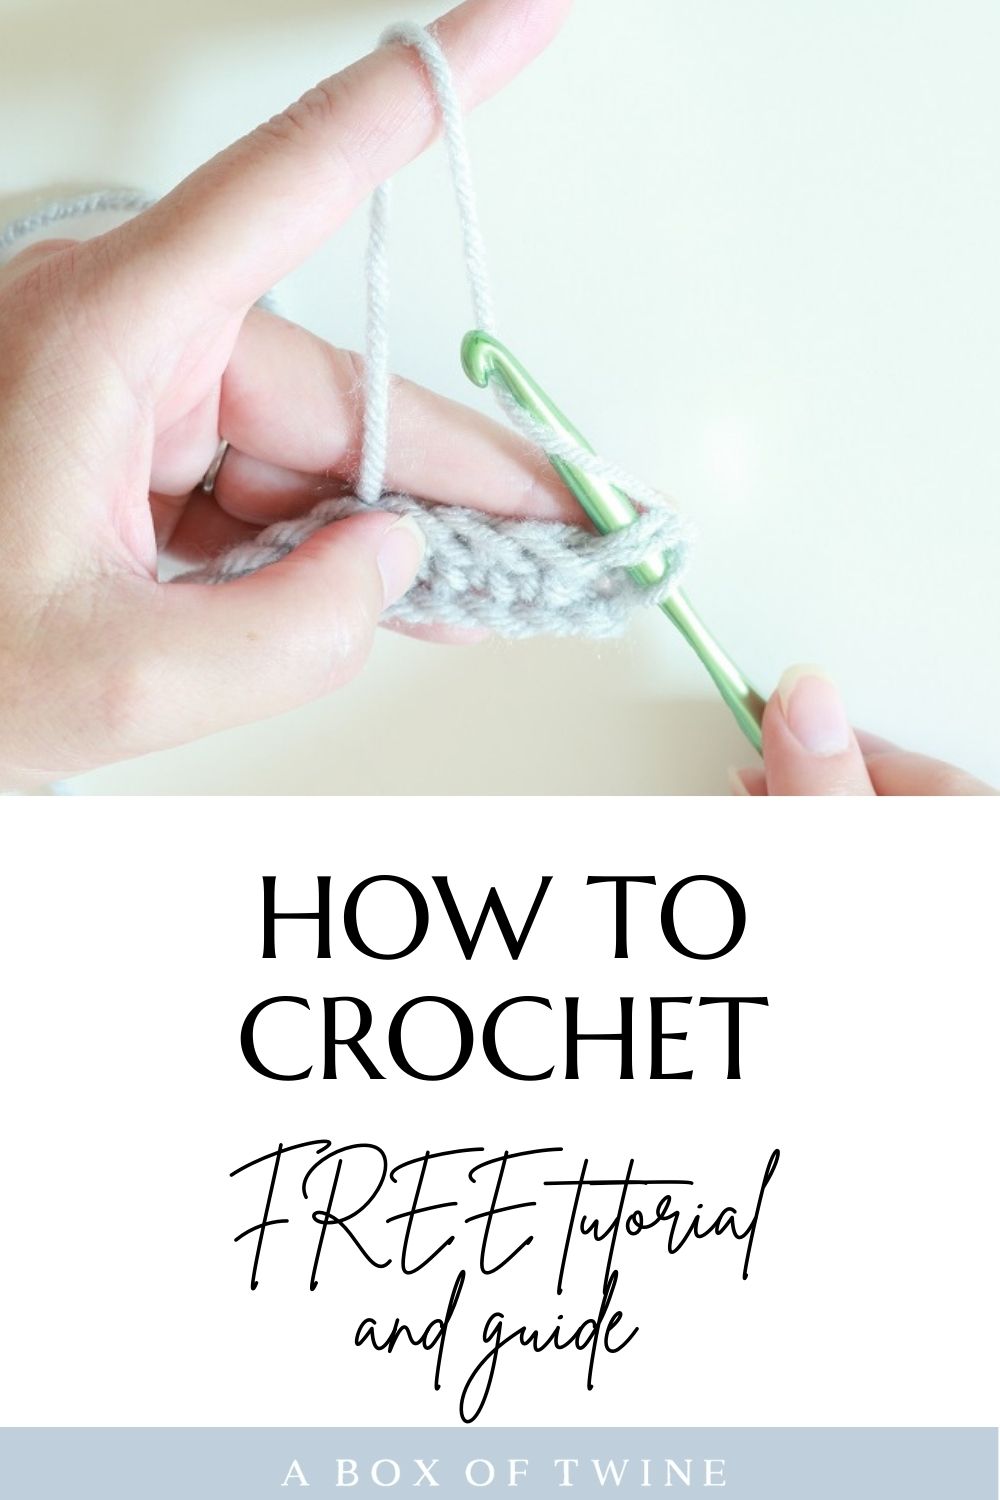 Crochet For Beginners: The Easiest & Practices Beginners Guide that will  Explain to You How to Start with Crochet even if You Have Never Touched a